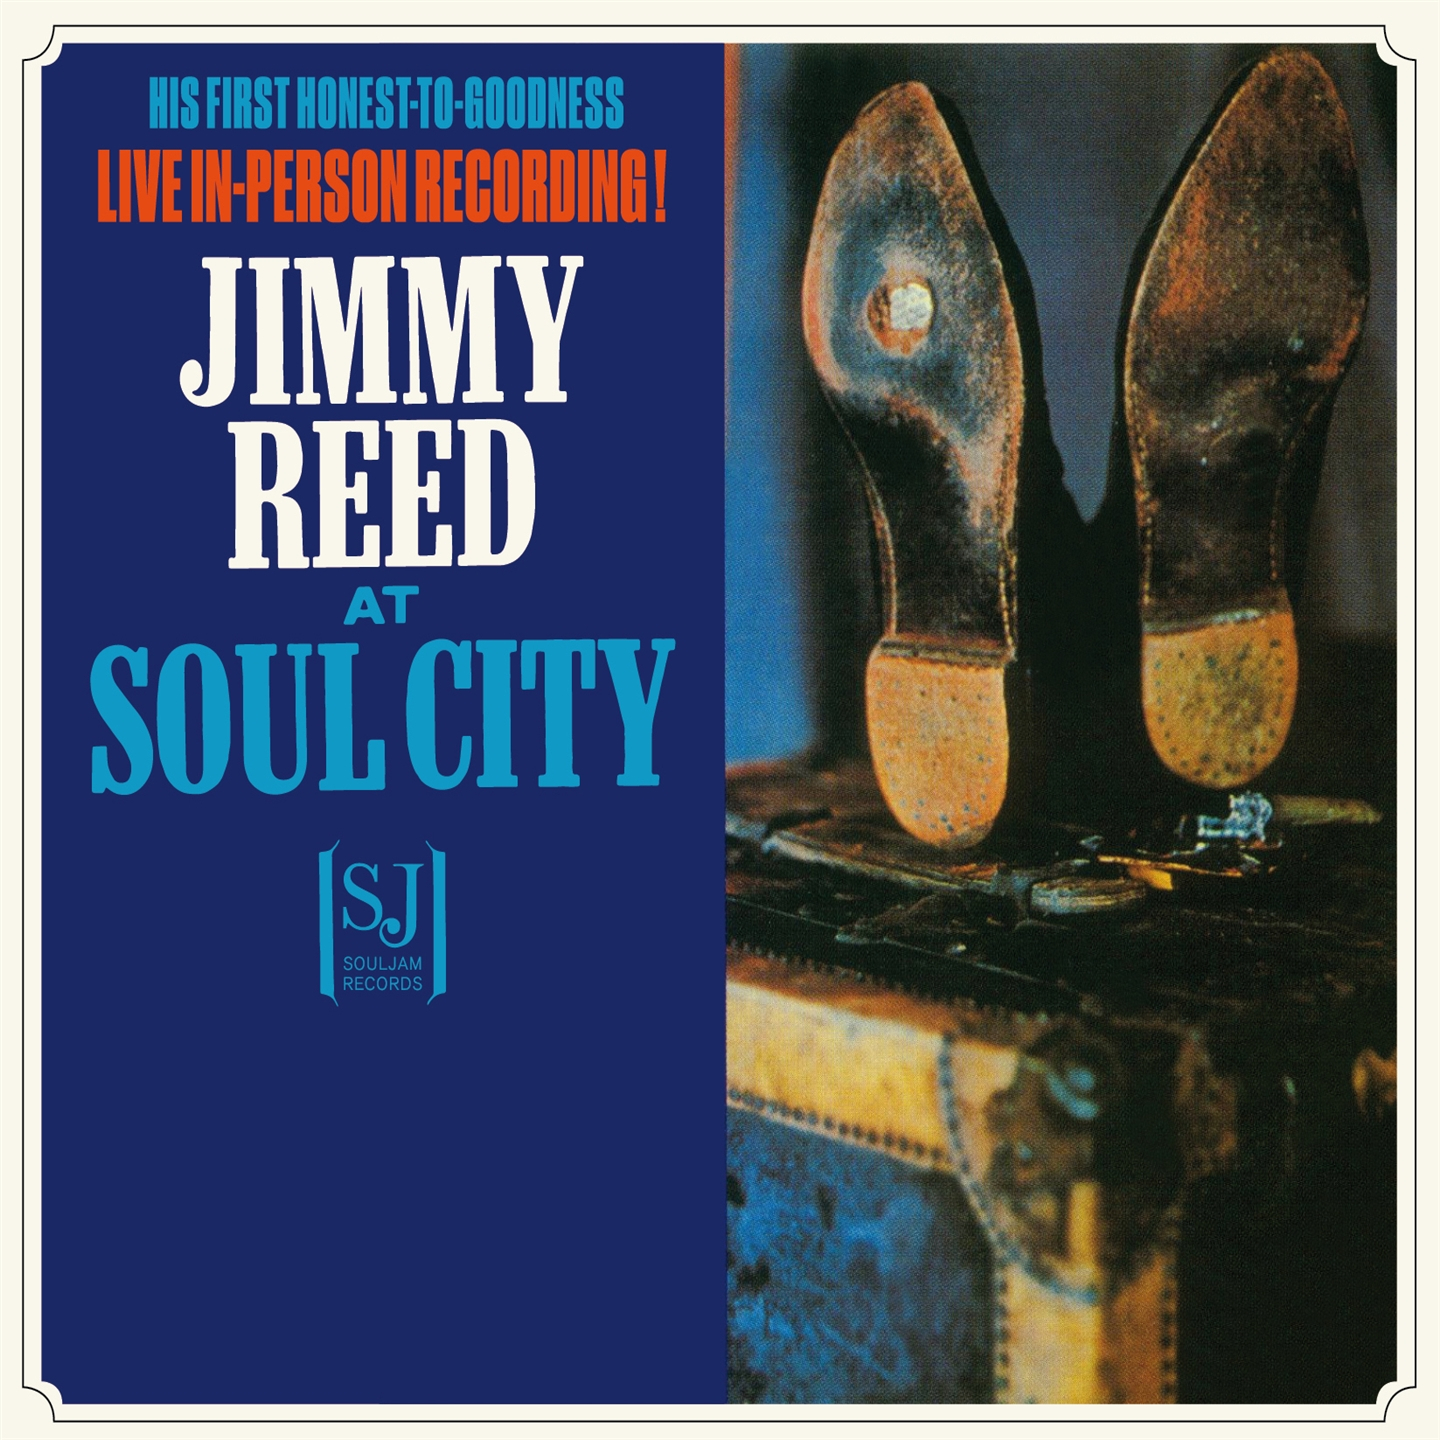 JIMMY REED AT SOUL CITY + SINGS THE BEST OF THE BLUES